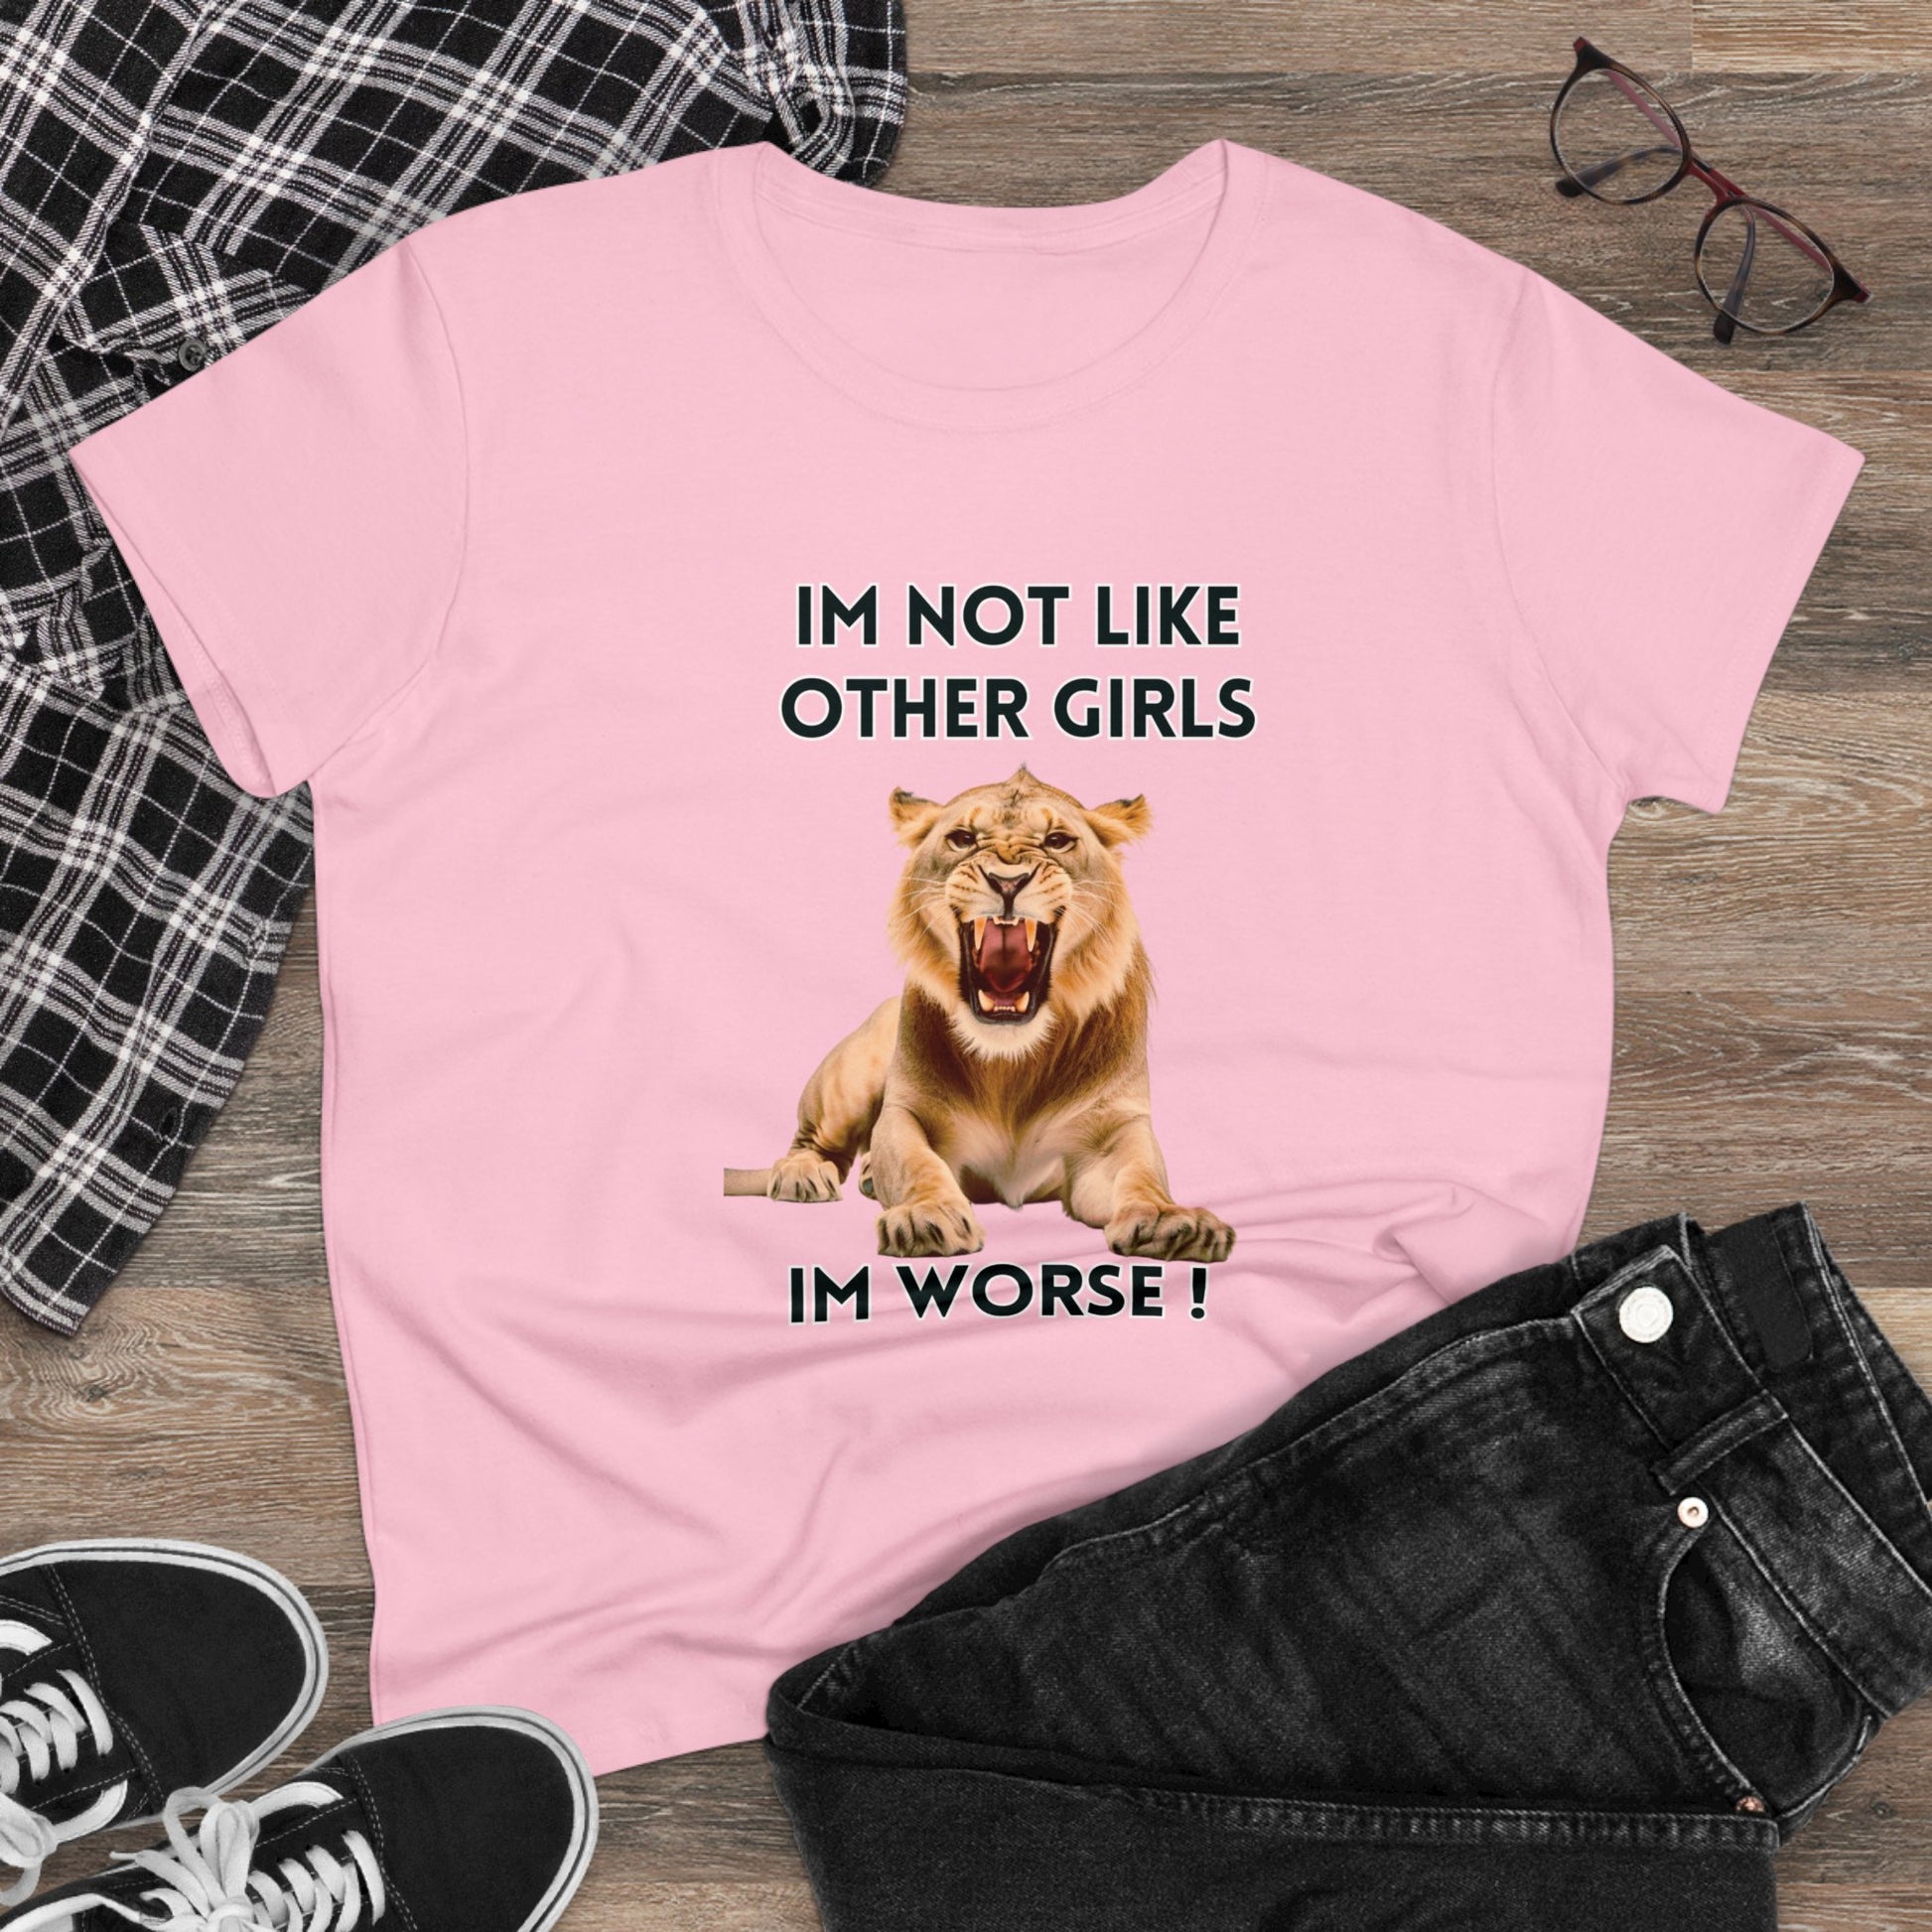 Angry Lion Funny T-Shirt - I'm Not Like Other Girls T-Shirt Light Pink S 